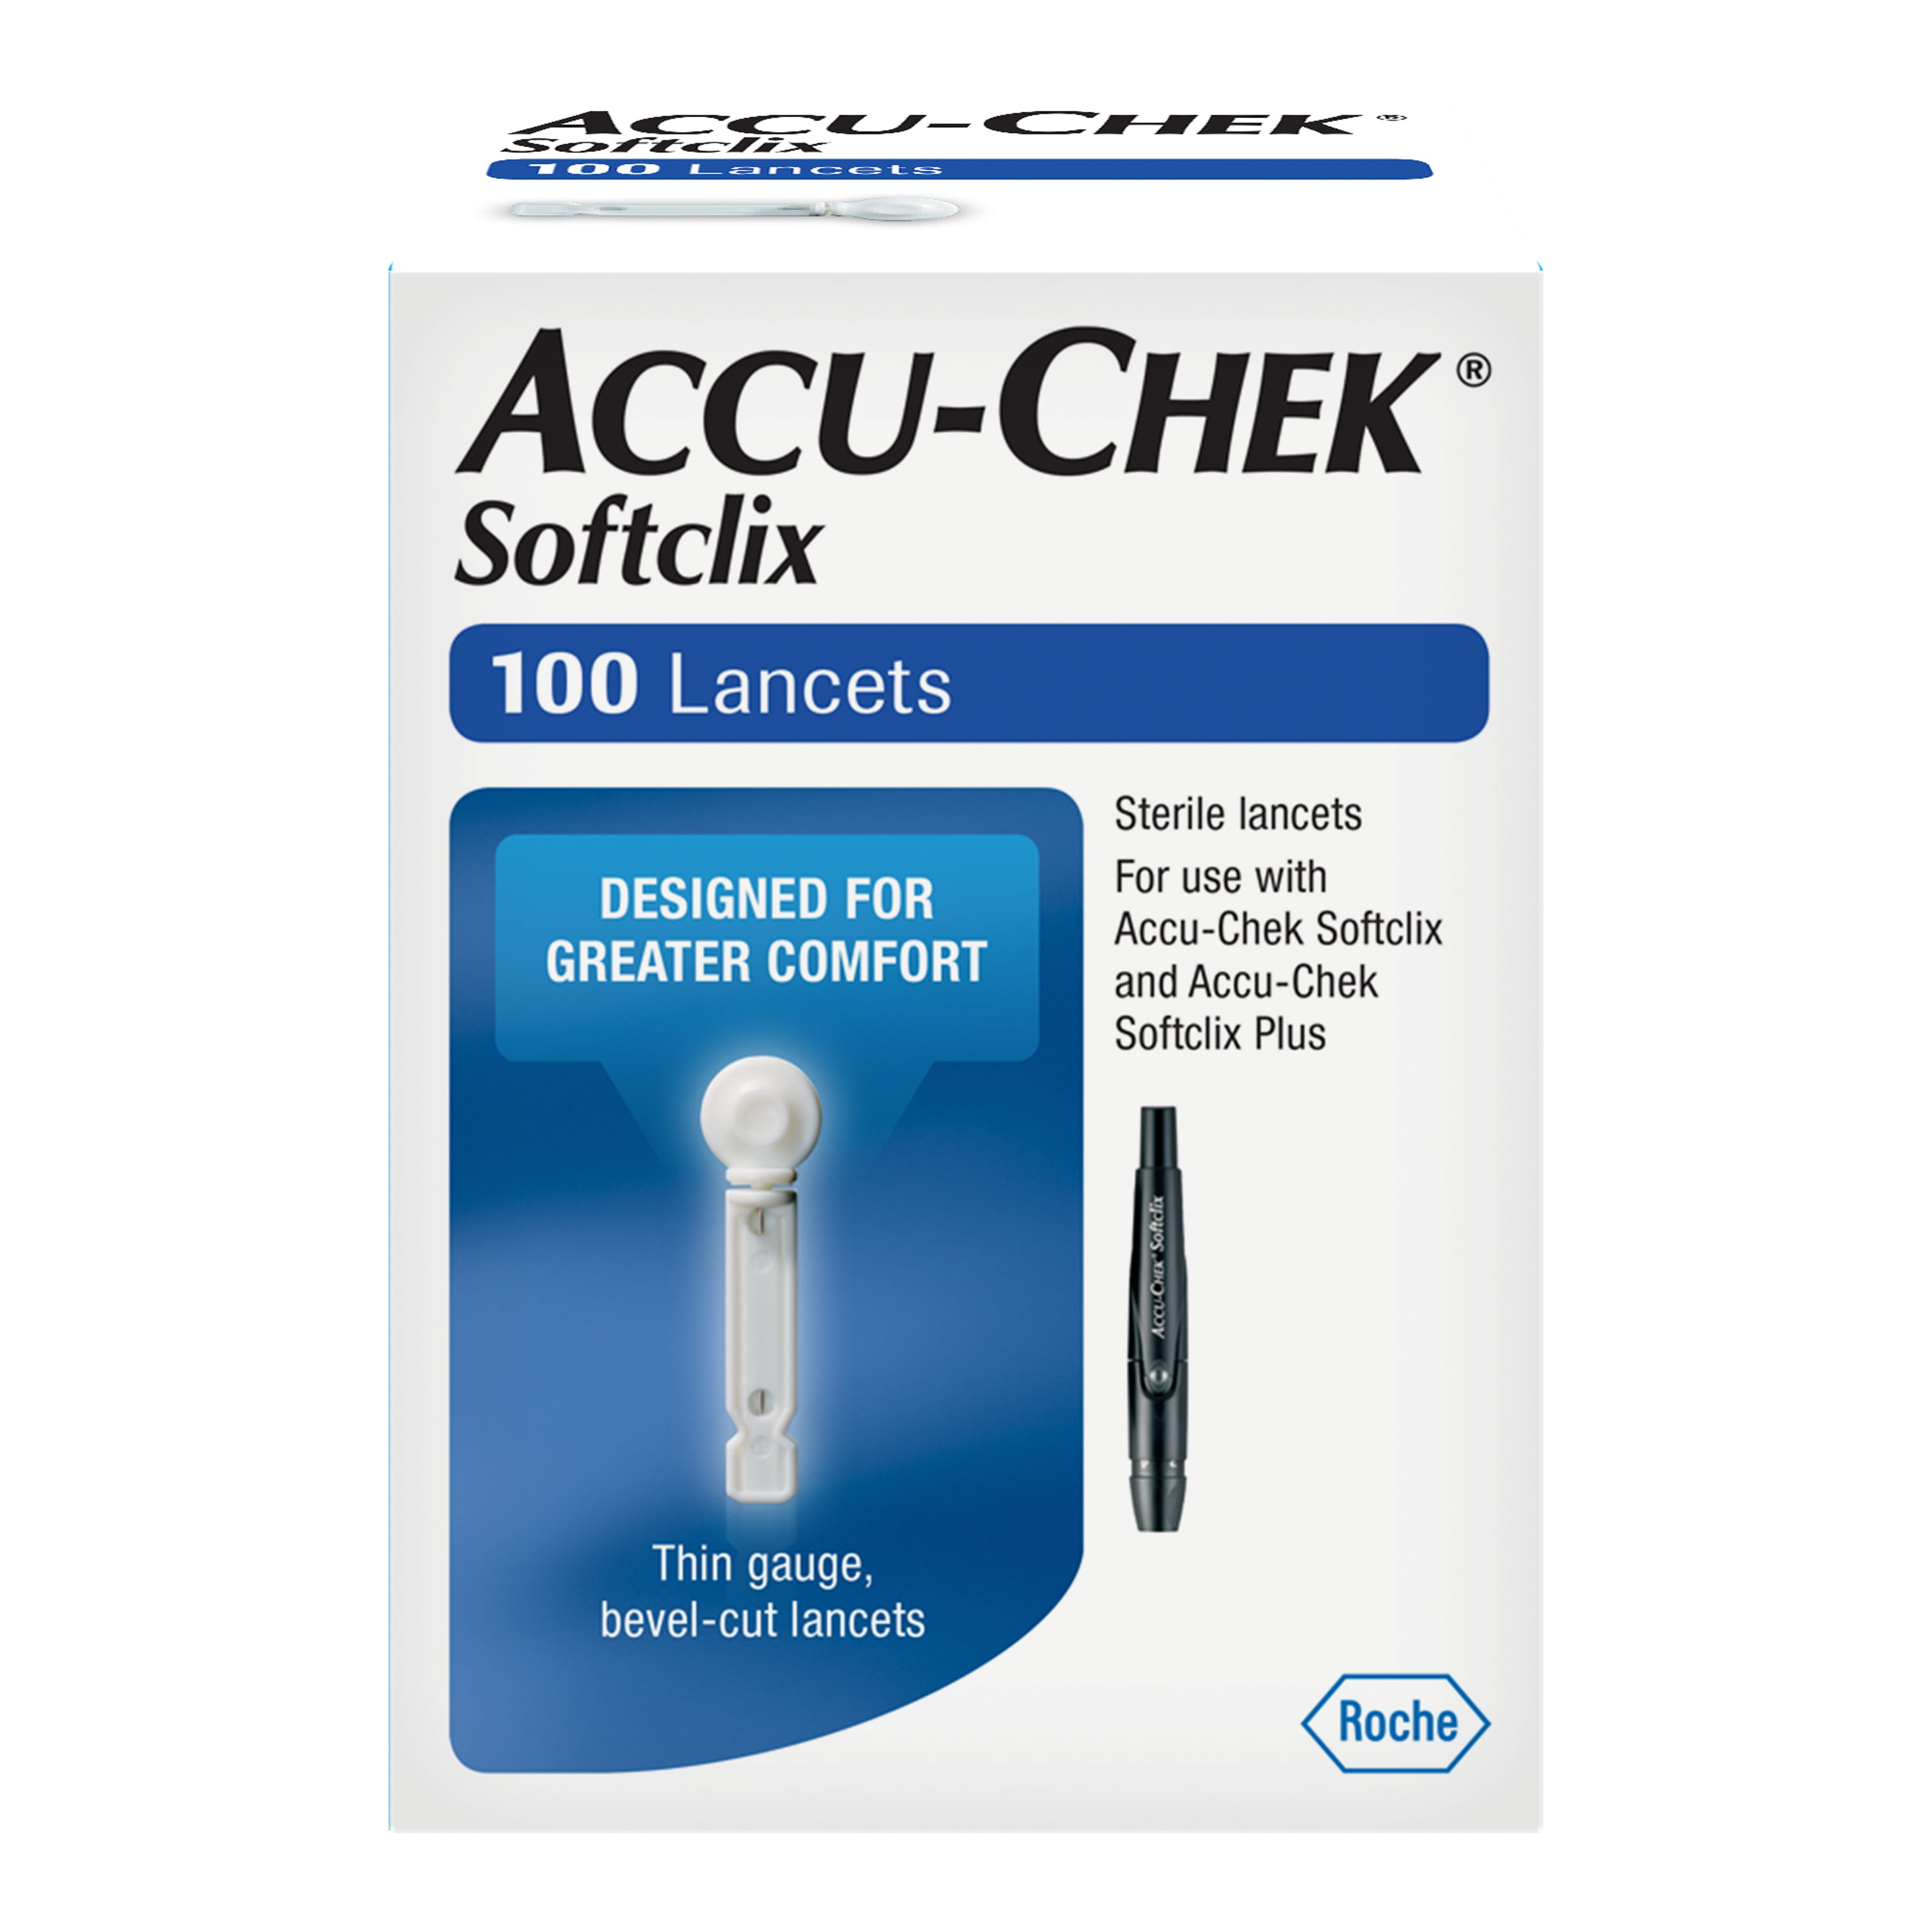 accu-chek test strips and lancets softclix